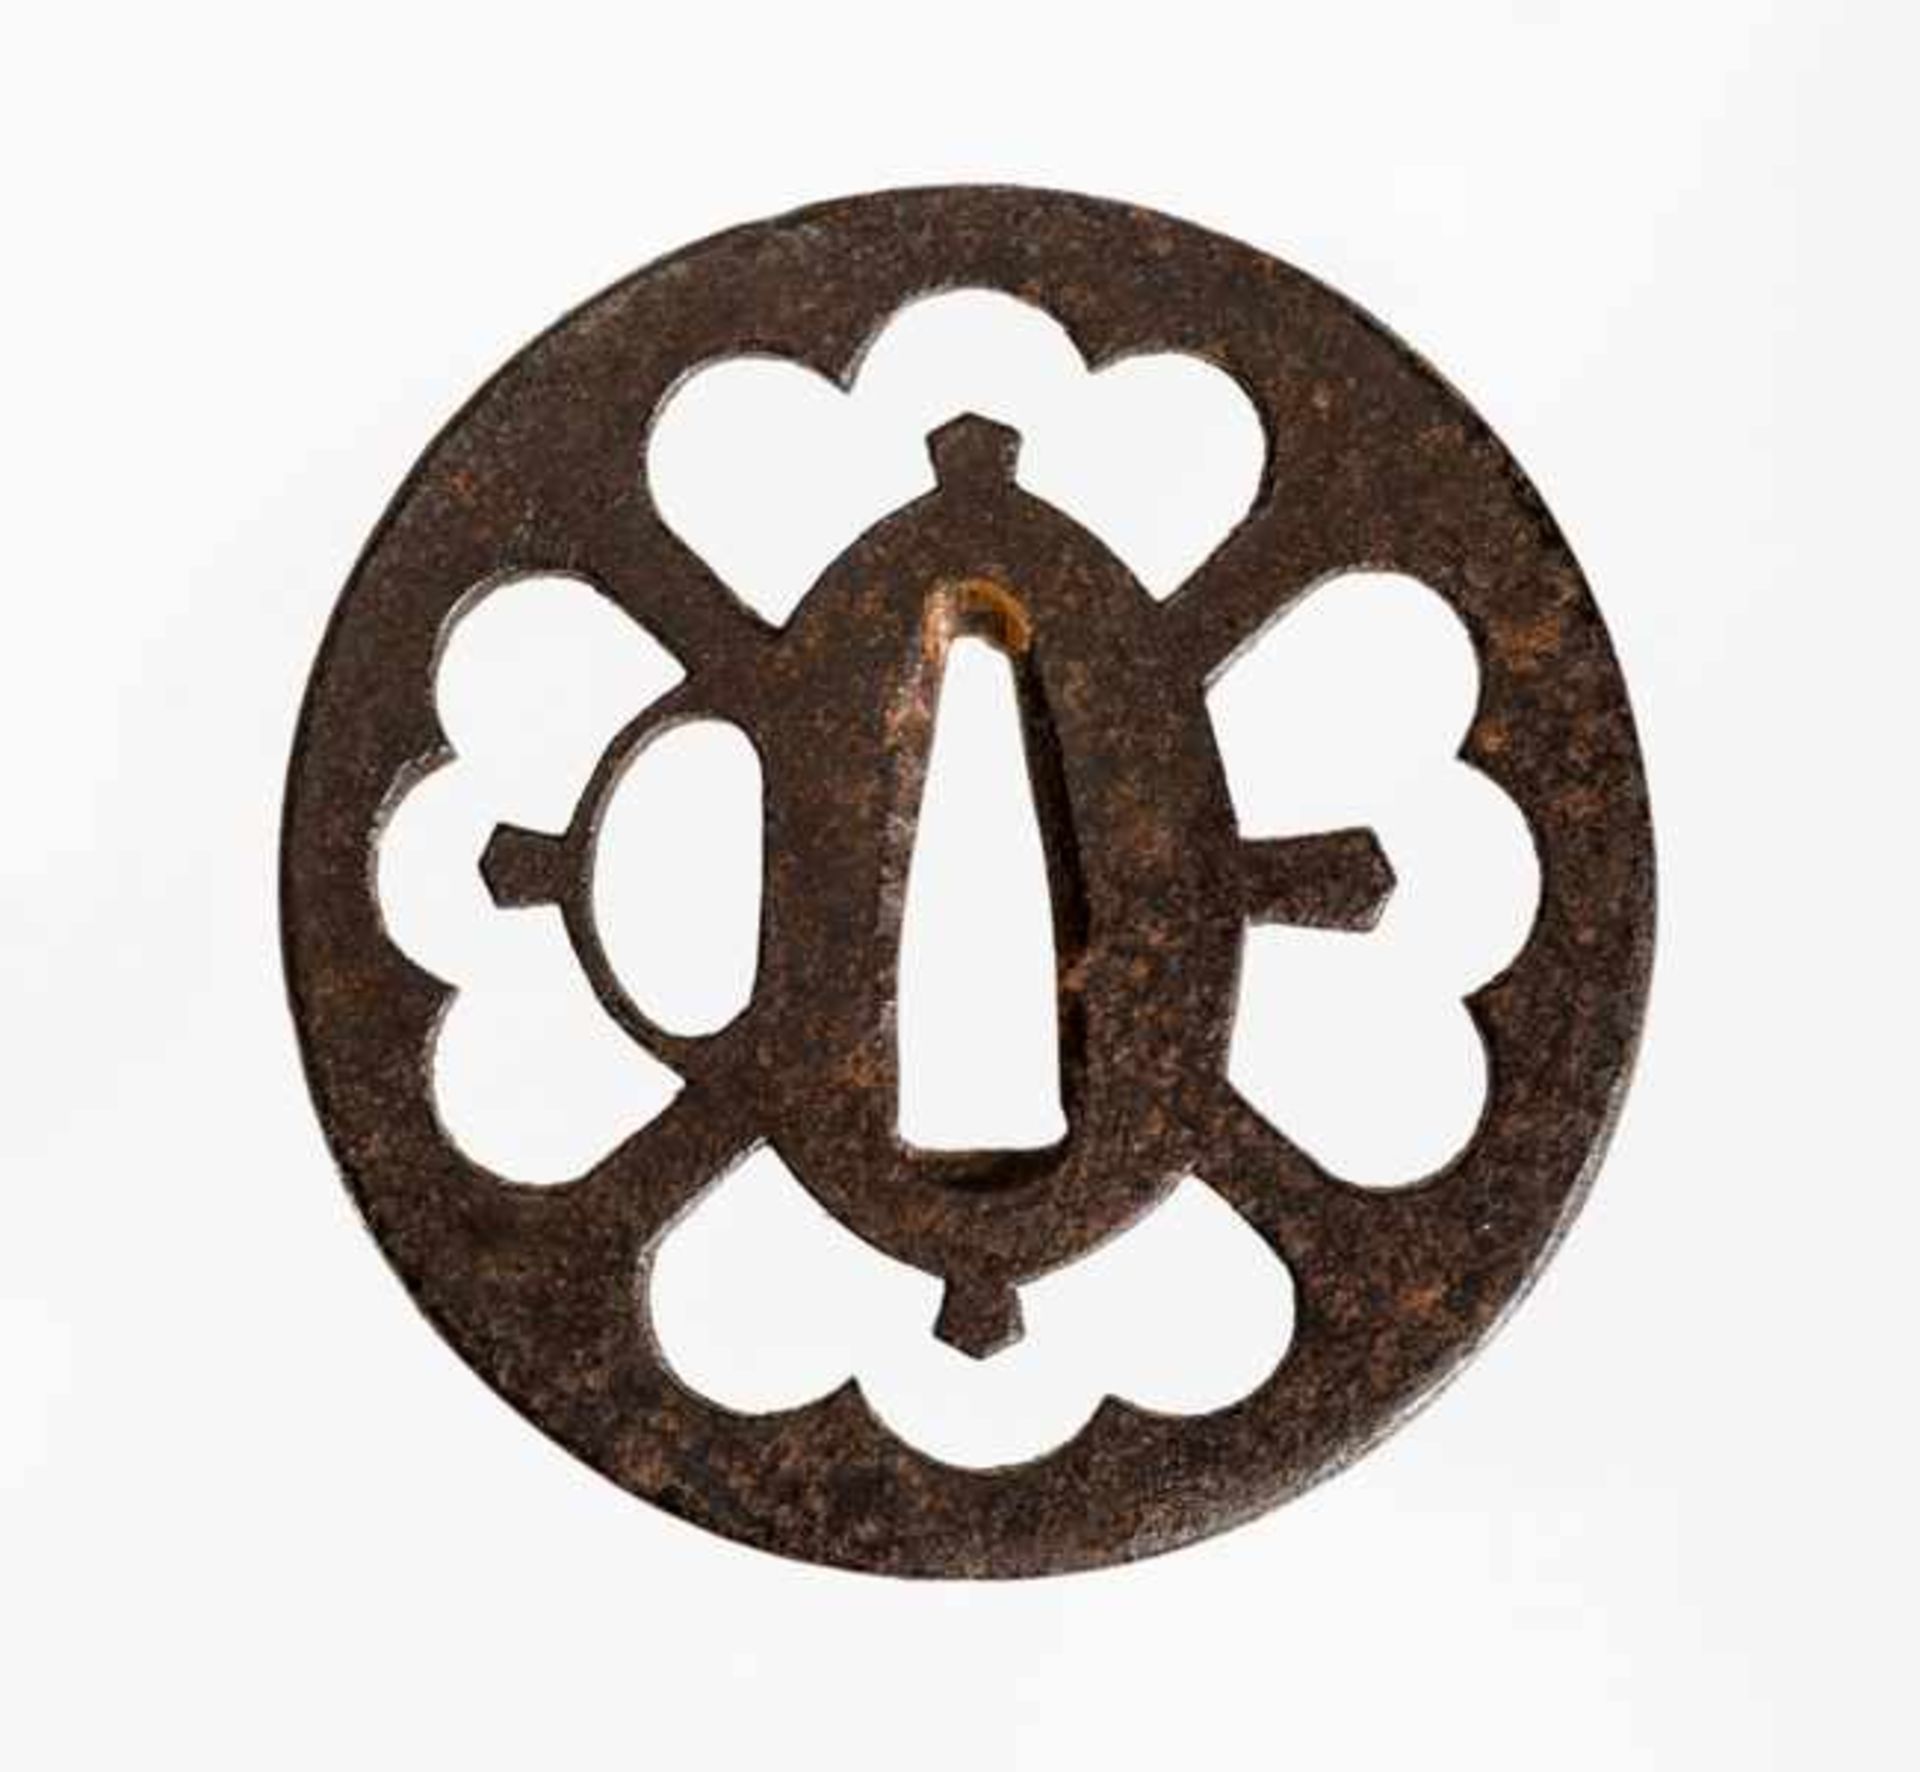 SUKASHI-TSUBA Iron. Japan, 18th to 19th cent.Round, old-style tsuba; both sides flat with multiple